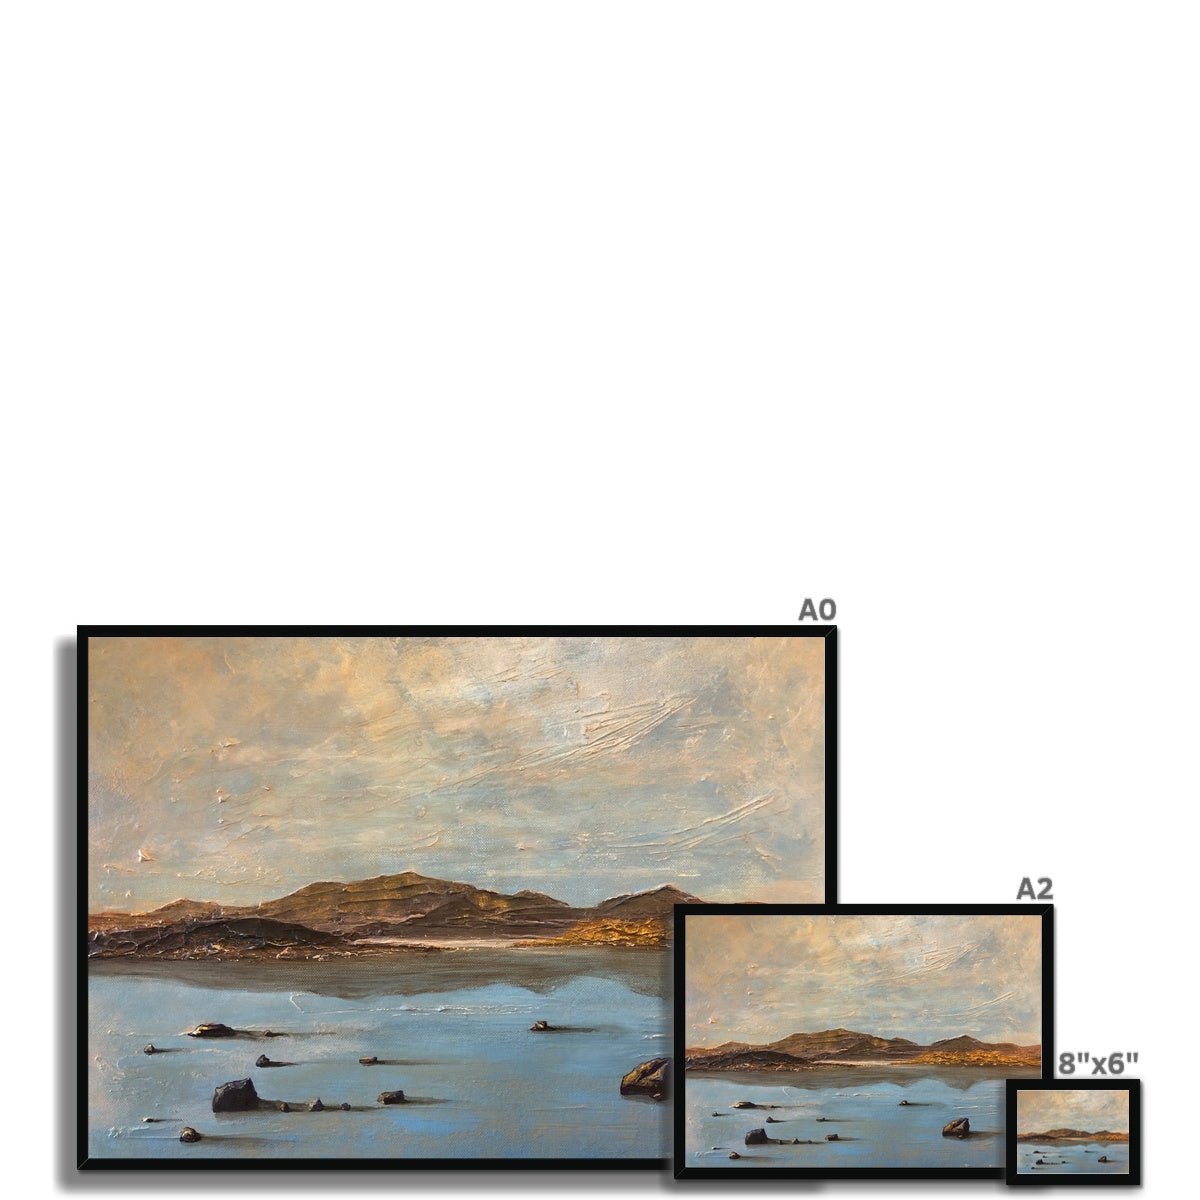 Loch Druidibeg South Uist Painting | Framed Prints From Scotland-Framed Prints-Scottish Lochs Art Gallery-Paintings, Prints, Homeware, Art Gifts From Scotland By Scottish Artist Kevin Hunter